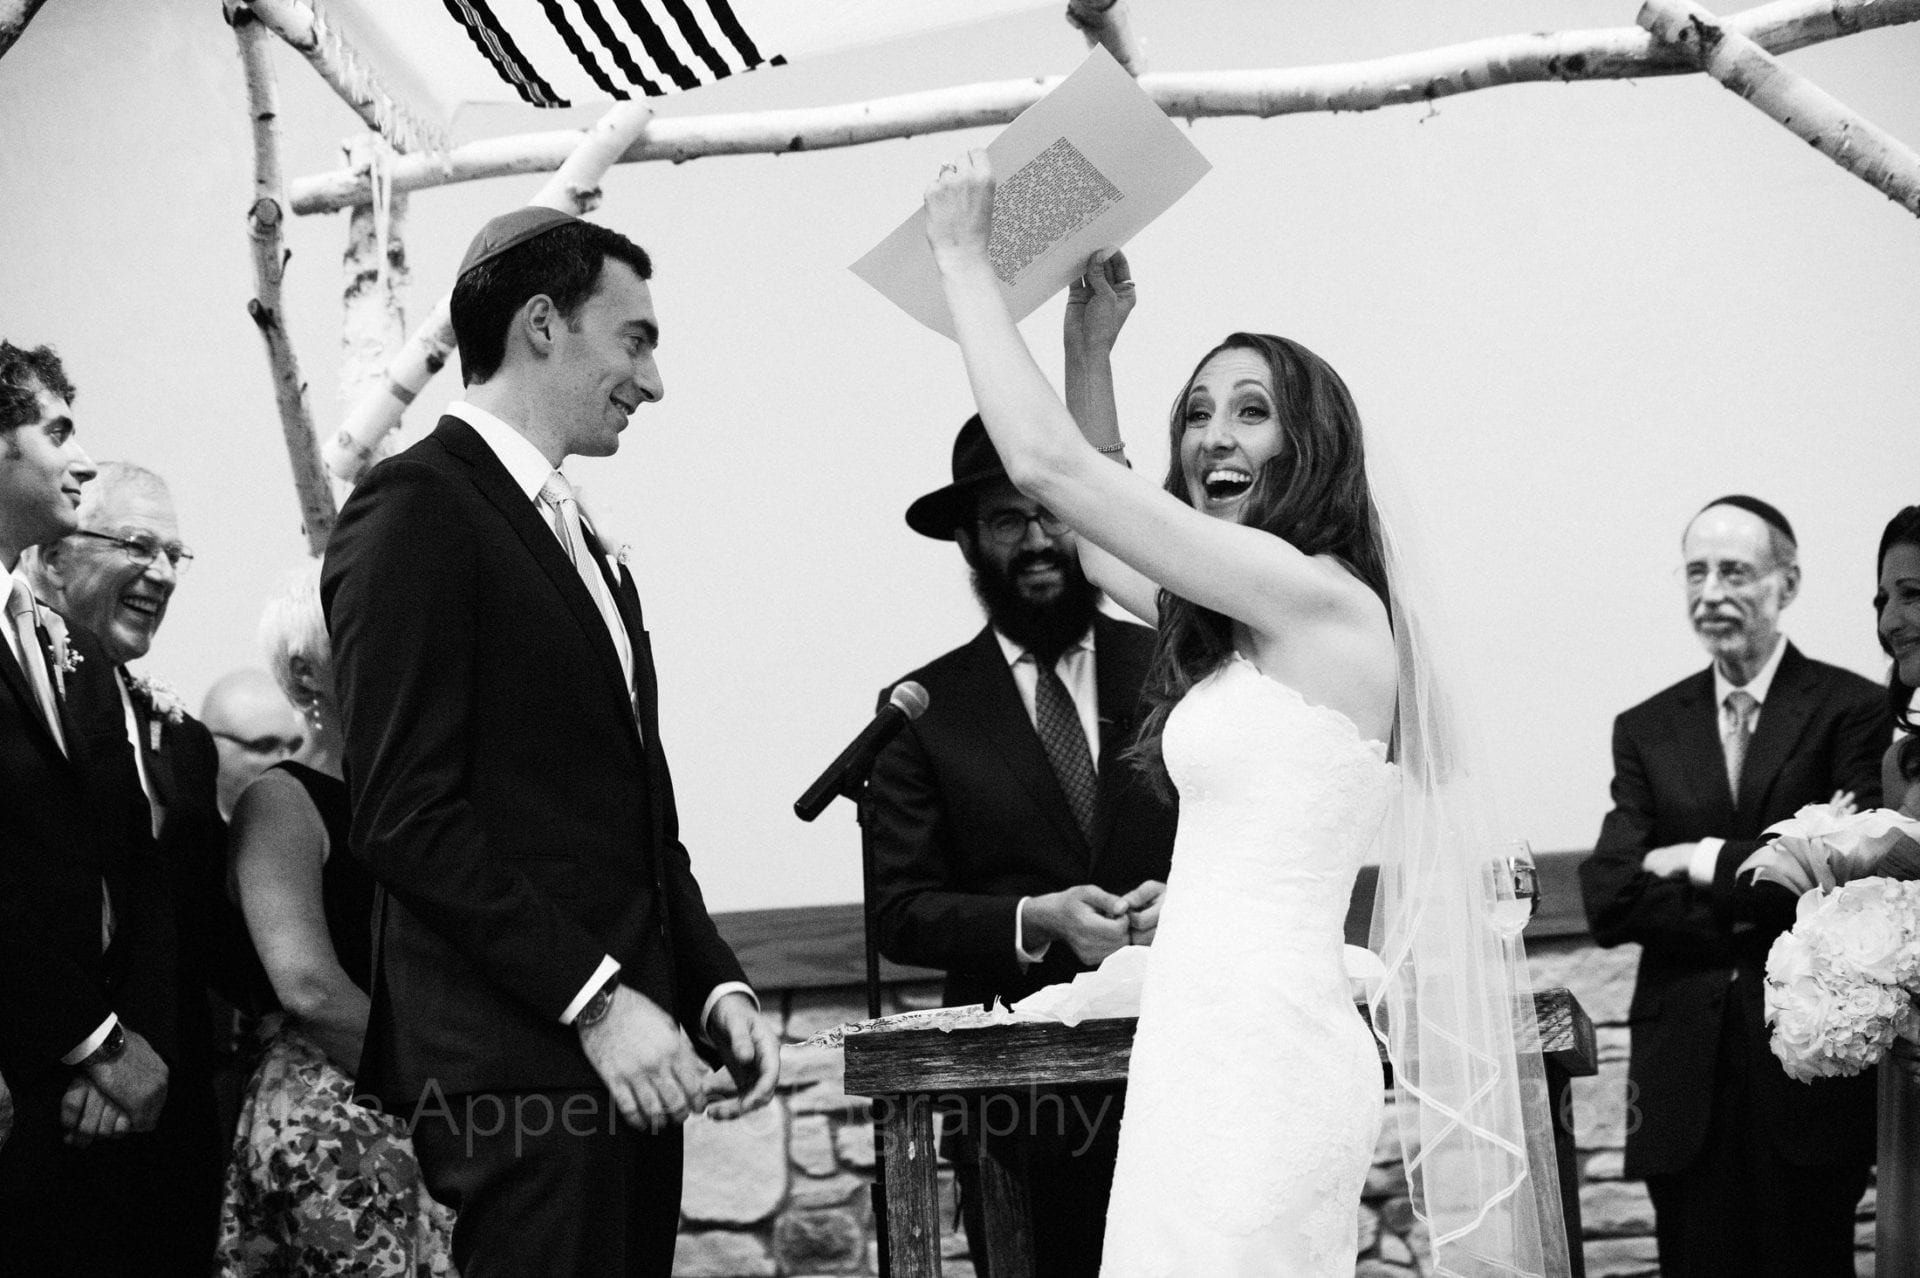 A smiling bride holds a ketubah above her head and looks at the guests during her wedding ceremony.